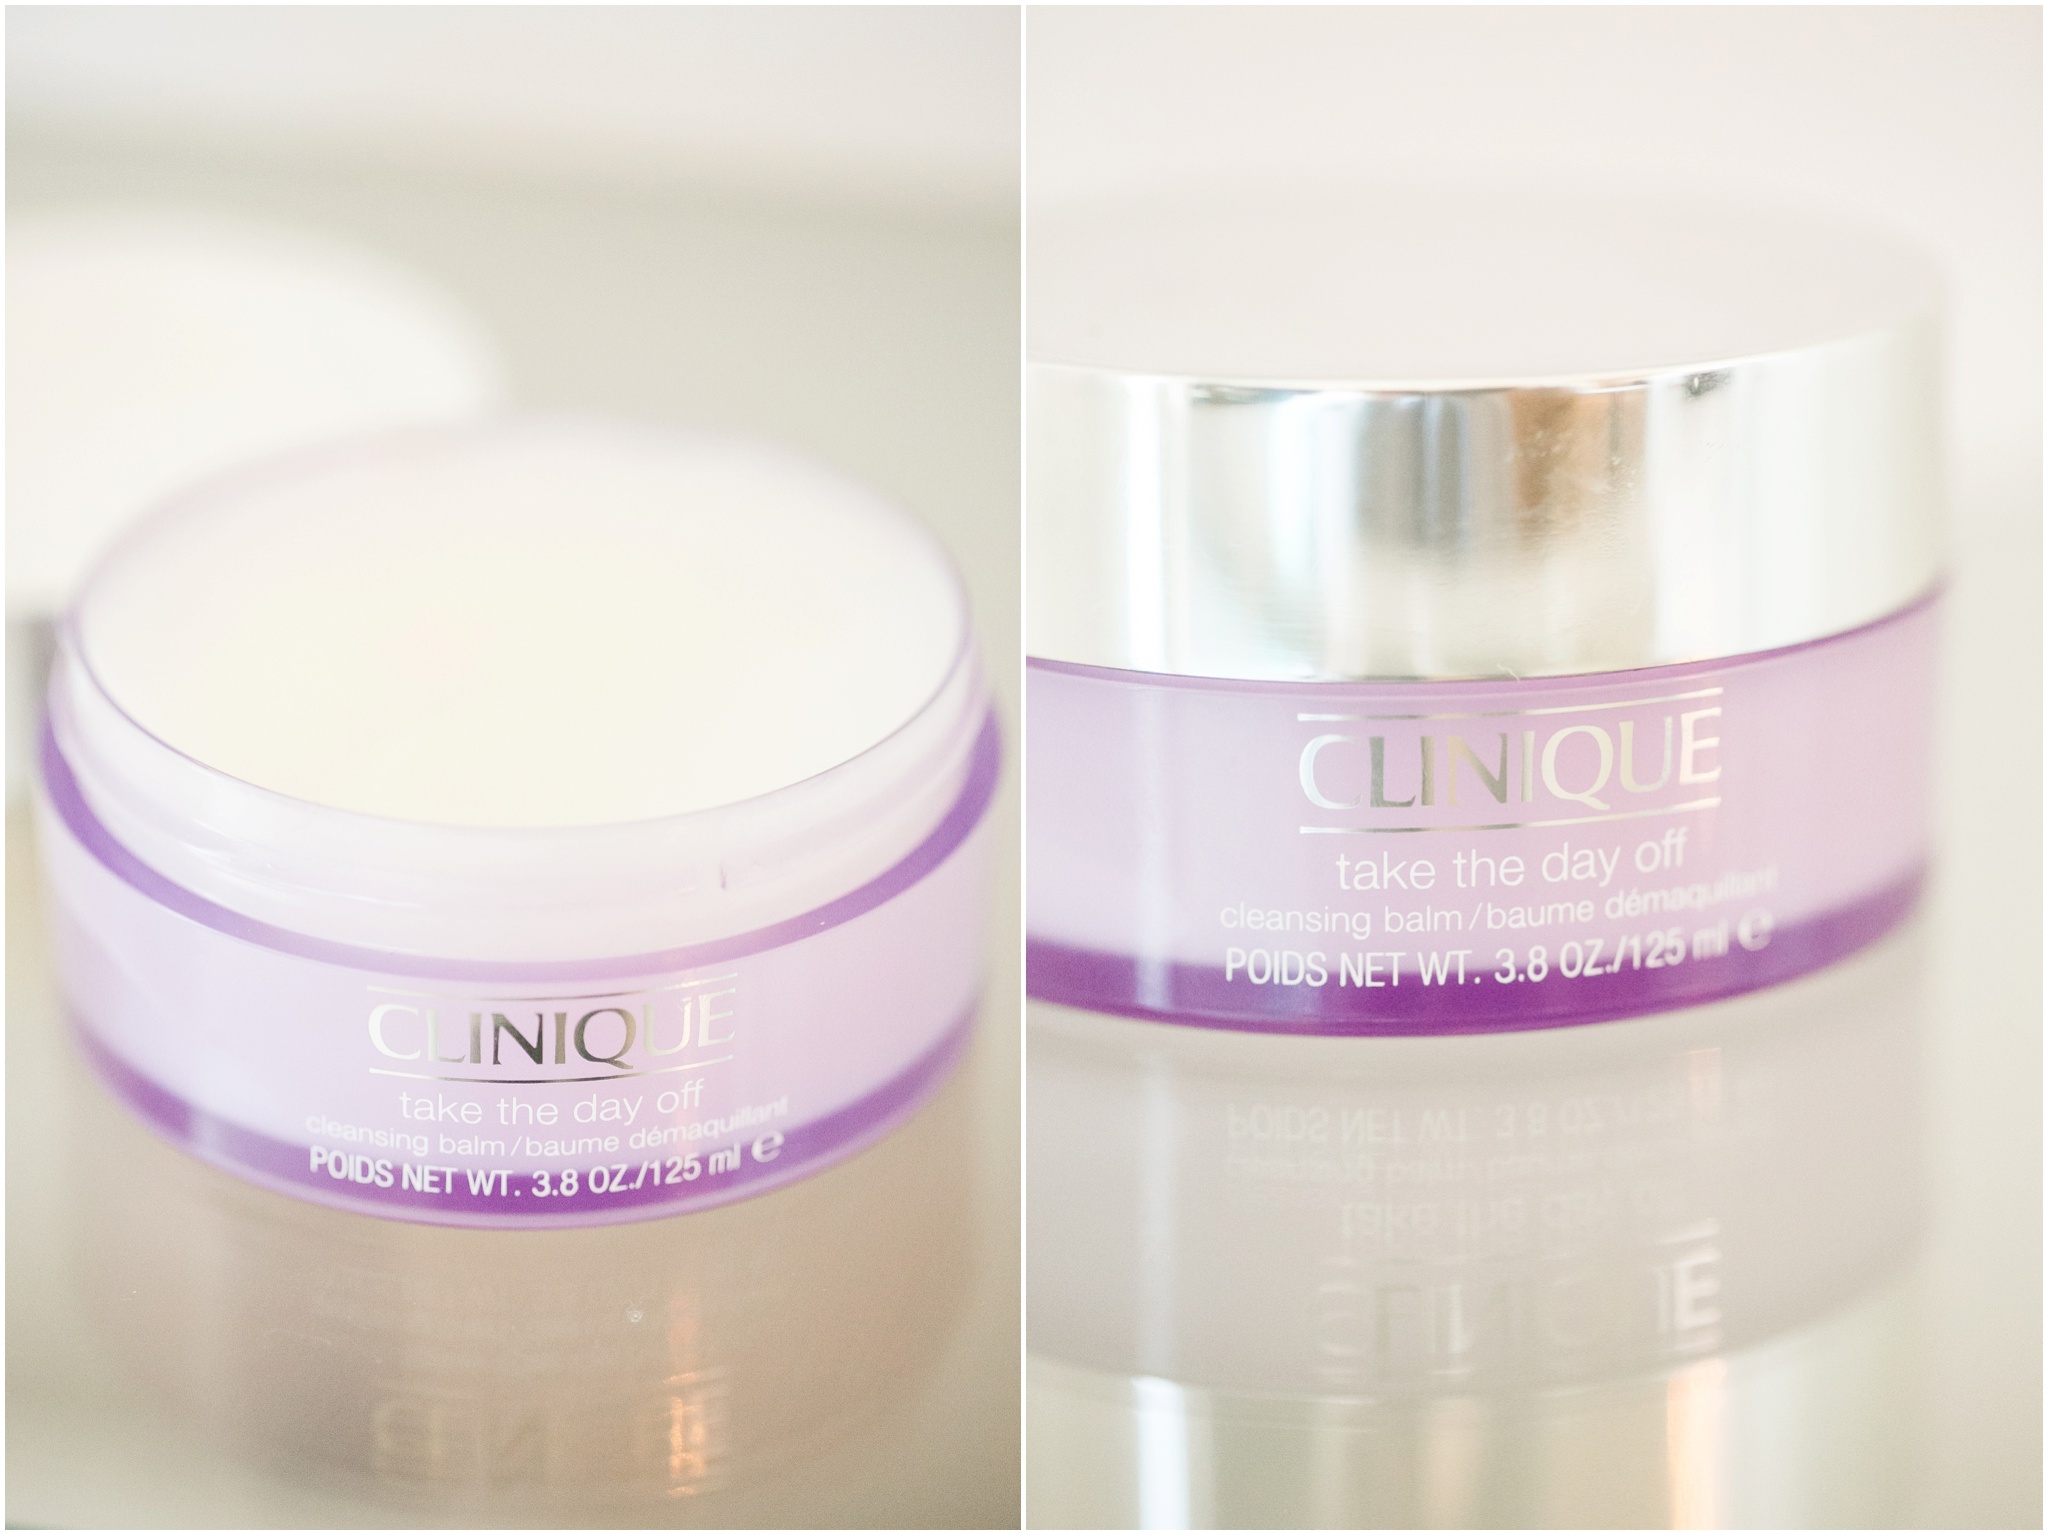 clinique_take_the_day_off_cleansing_balm_review_2701.jpg